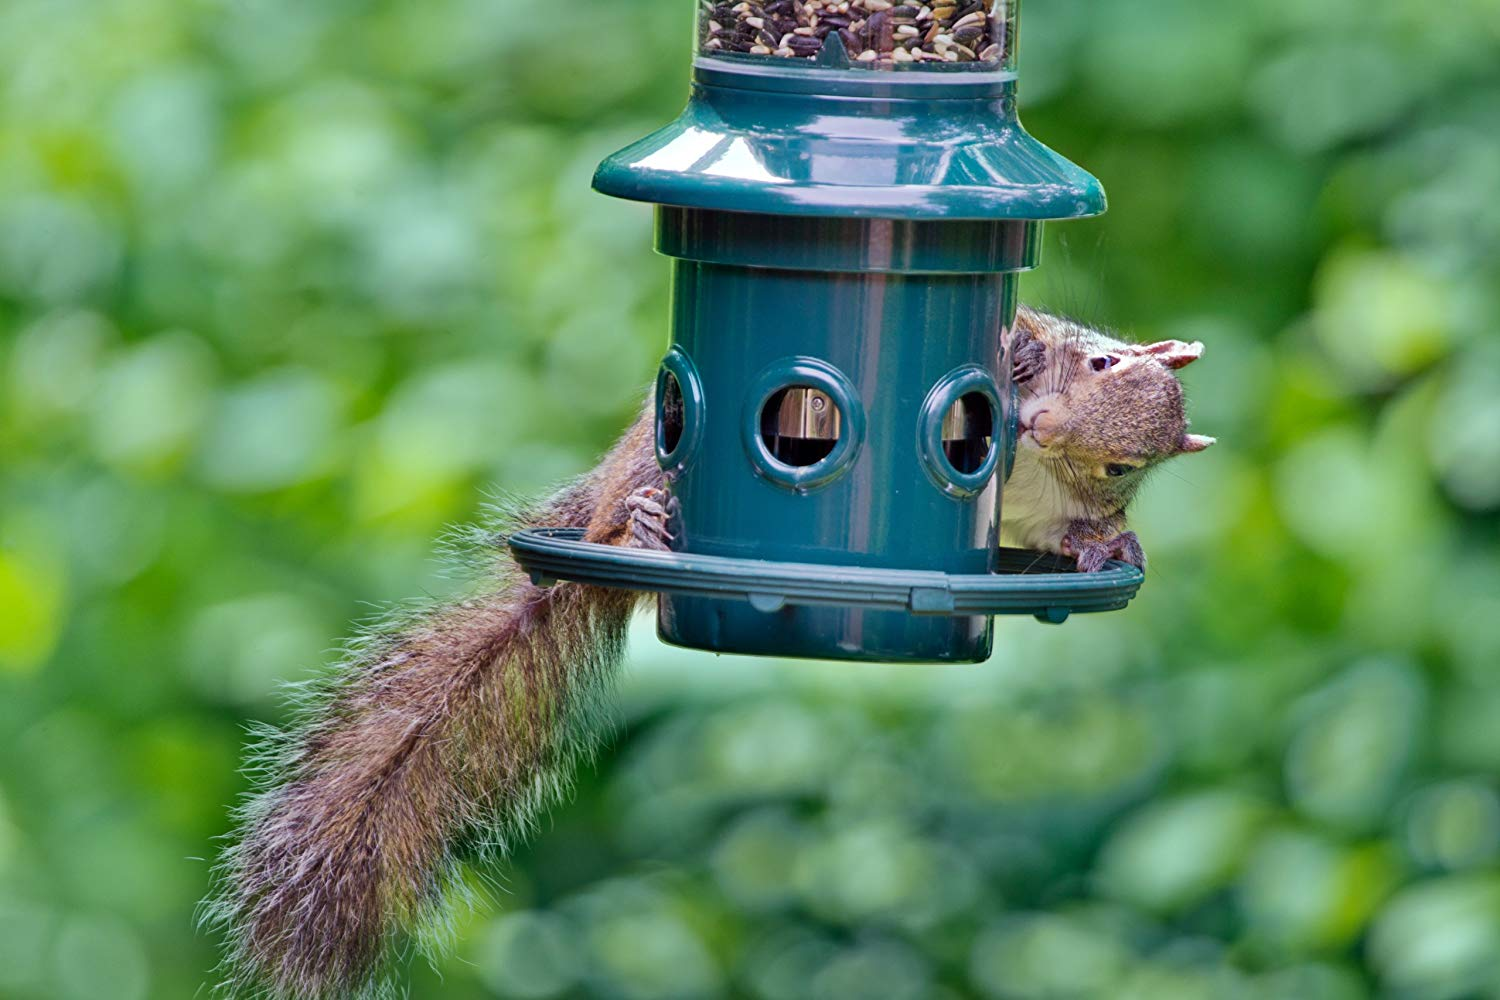 Don't let your bird feeder feed any other animals but birds. It's a bird feeder, god dang it.<br><br>Give squirrels a bad time <a href="https://amzn.to/2qaqEJS" target="_blank" "nofollow">here</a>.